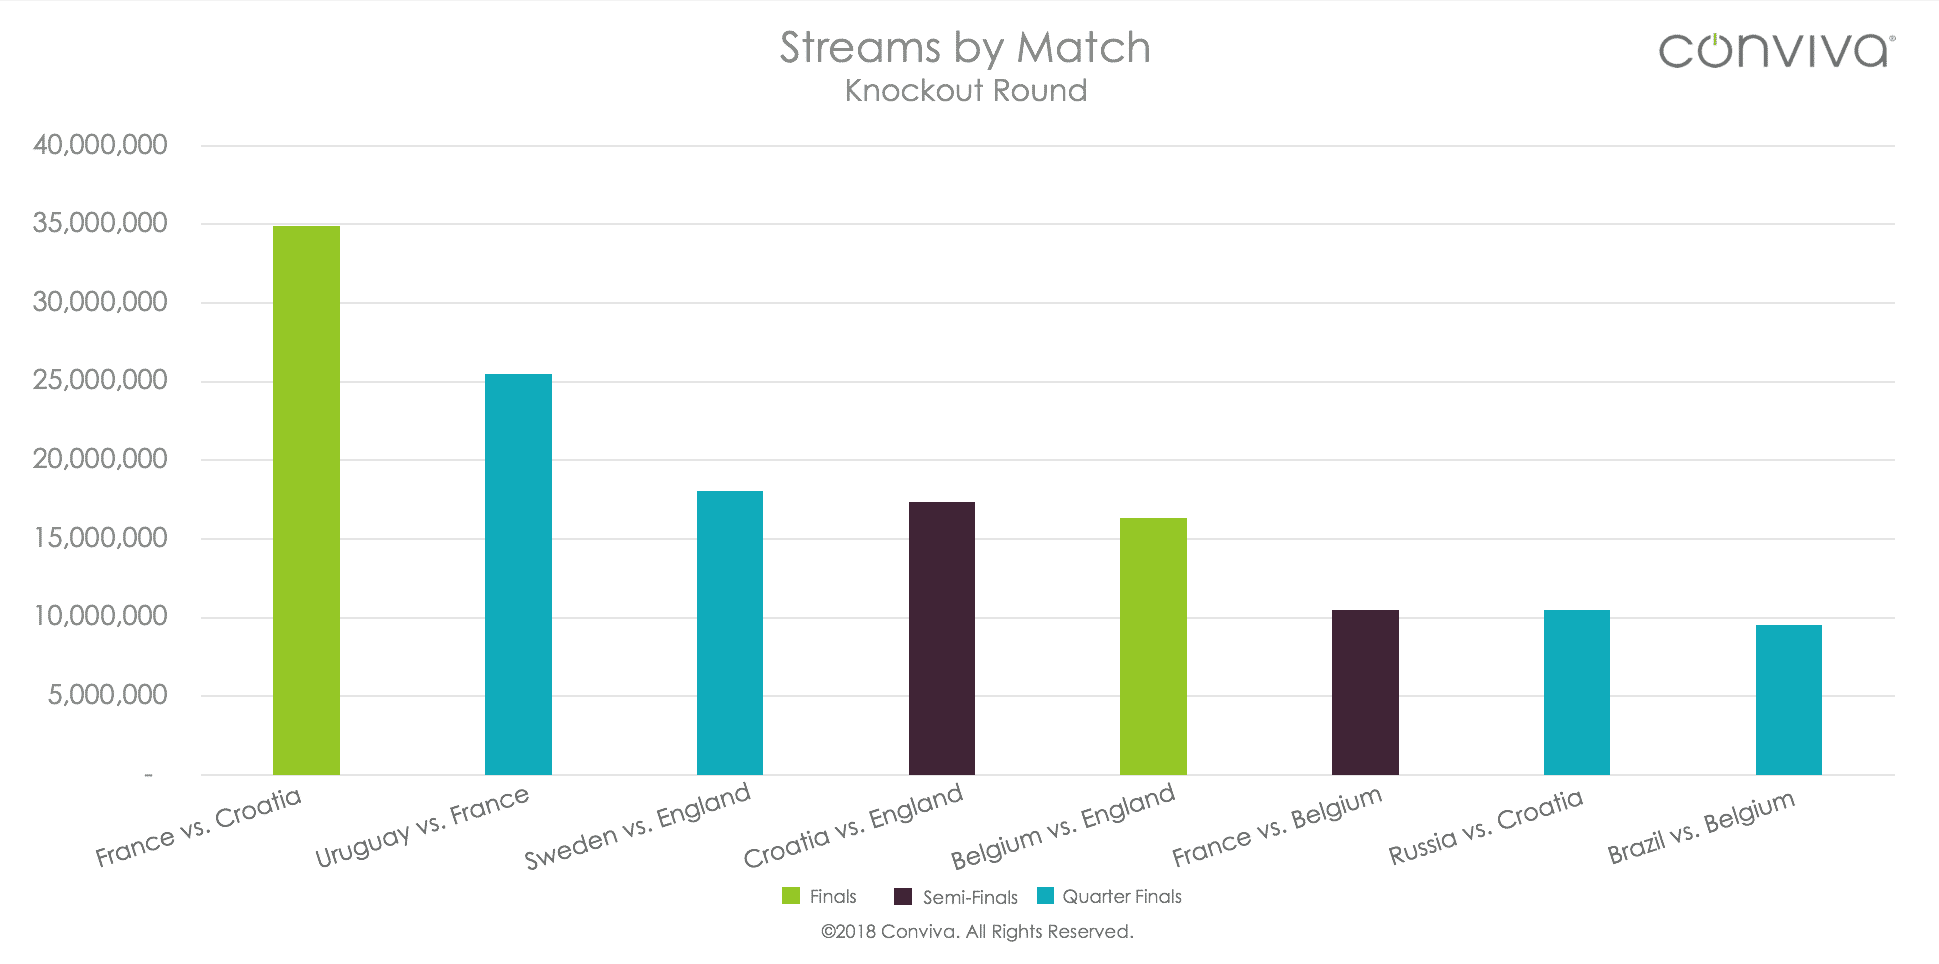 Bar Chart Peak Concurrent Plays Of World Cup Streams By Match Knockout Round By Conviva